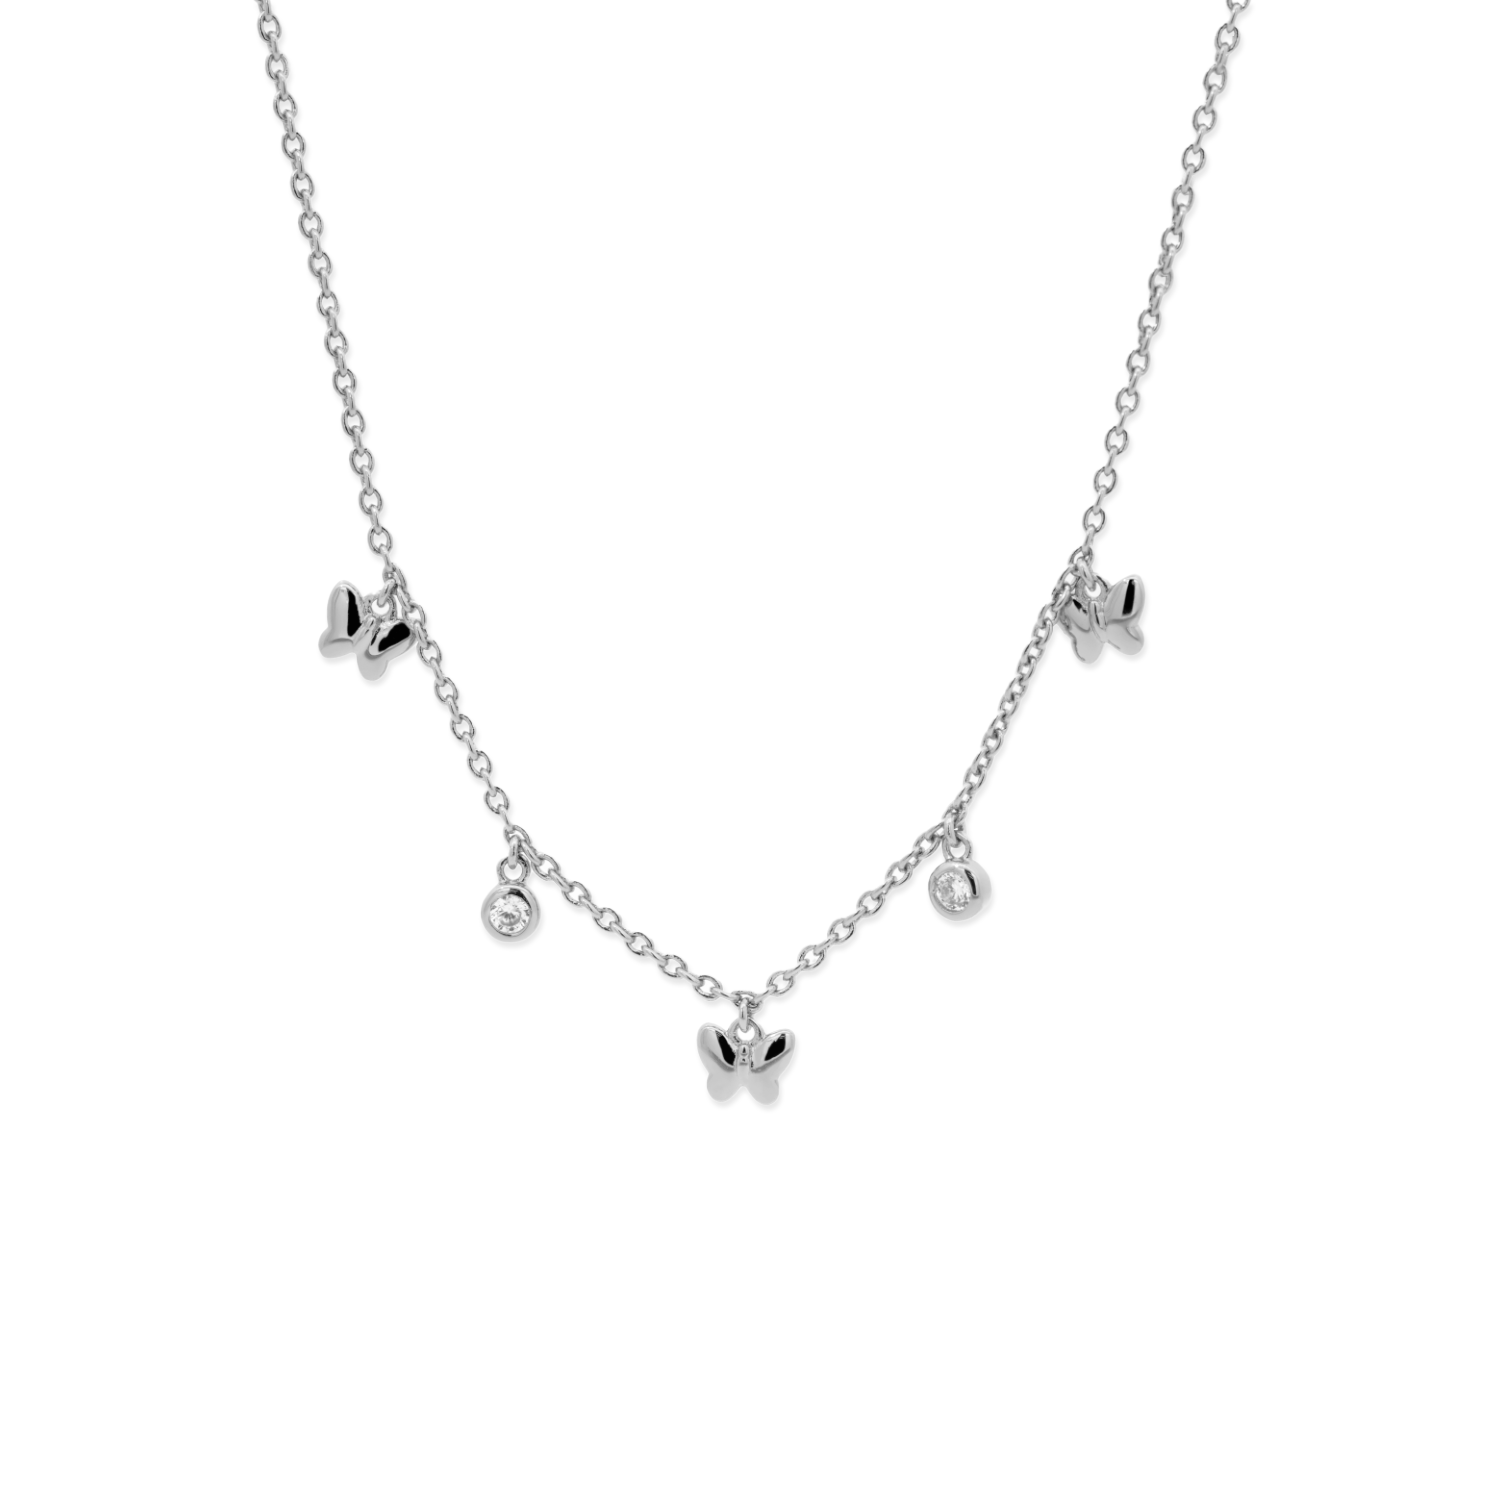 Elegant and dainty necklace. 925 silver bracelet with butterfly motifs and set with cubic zirconia stones.